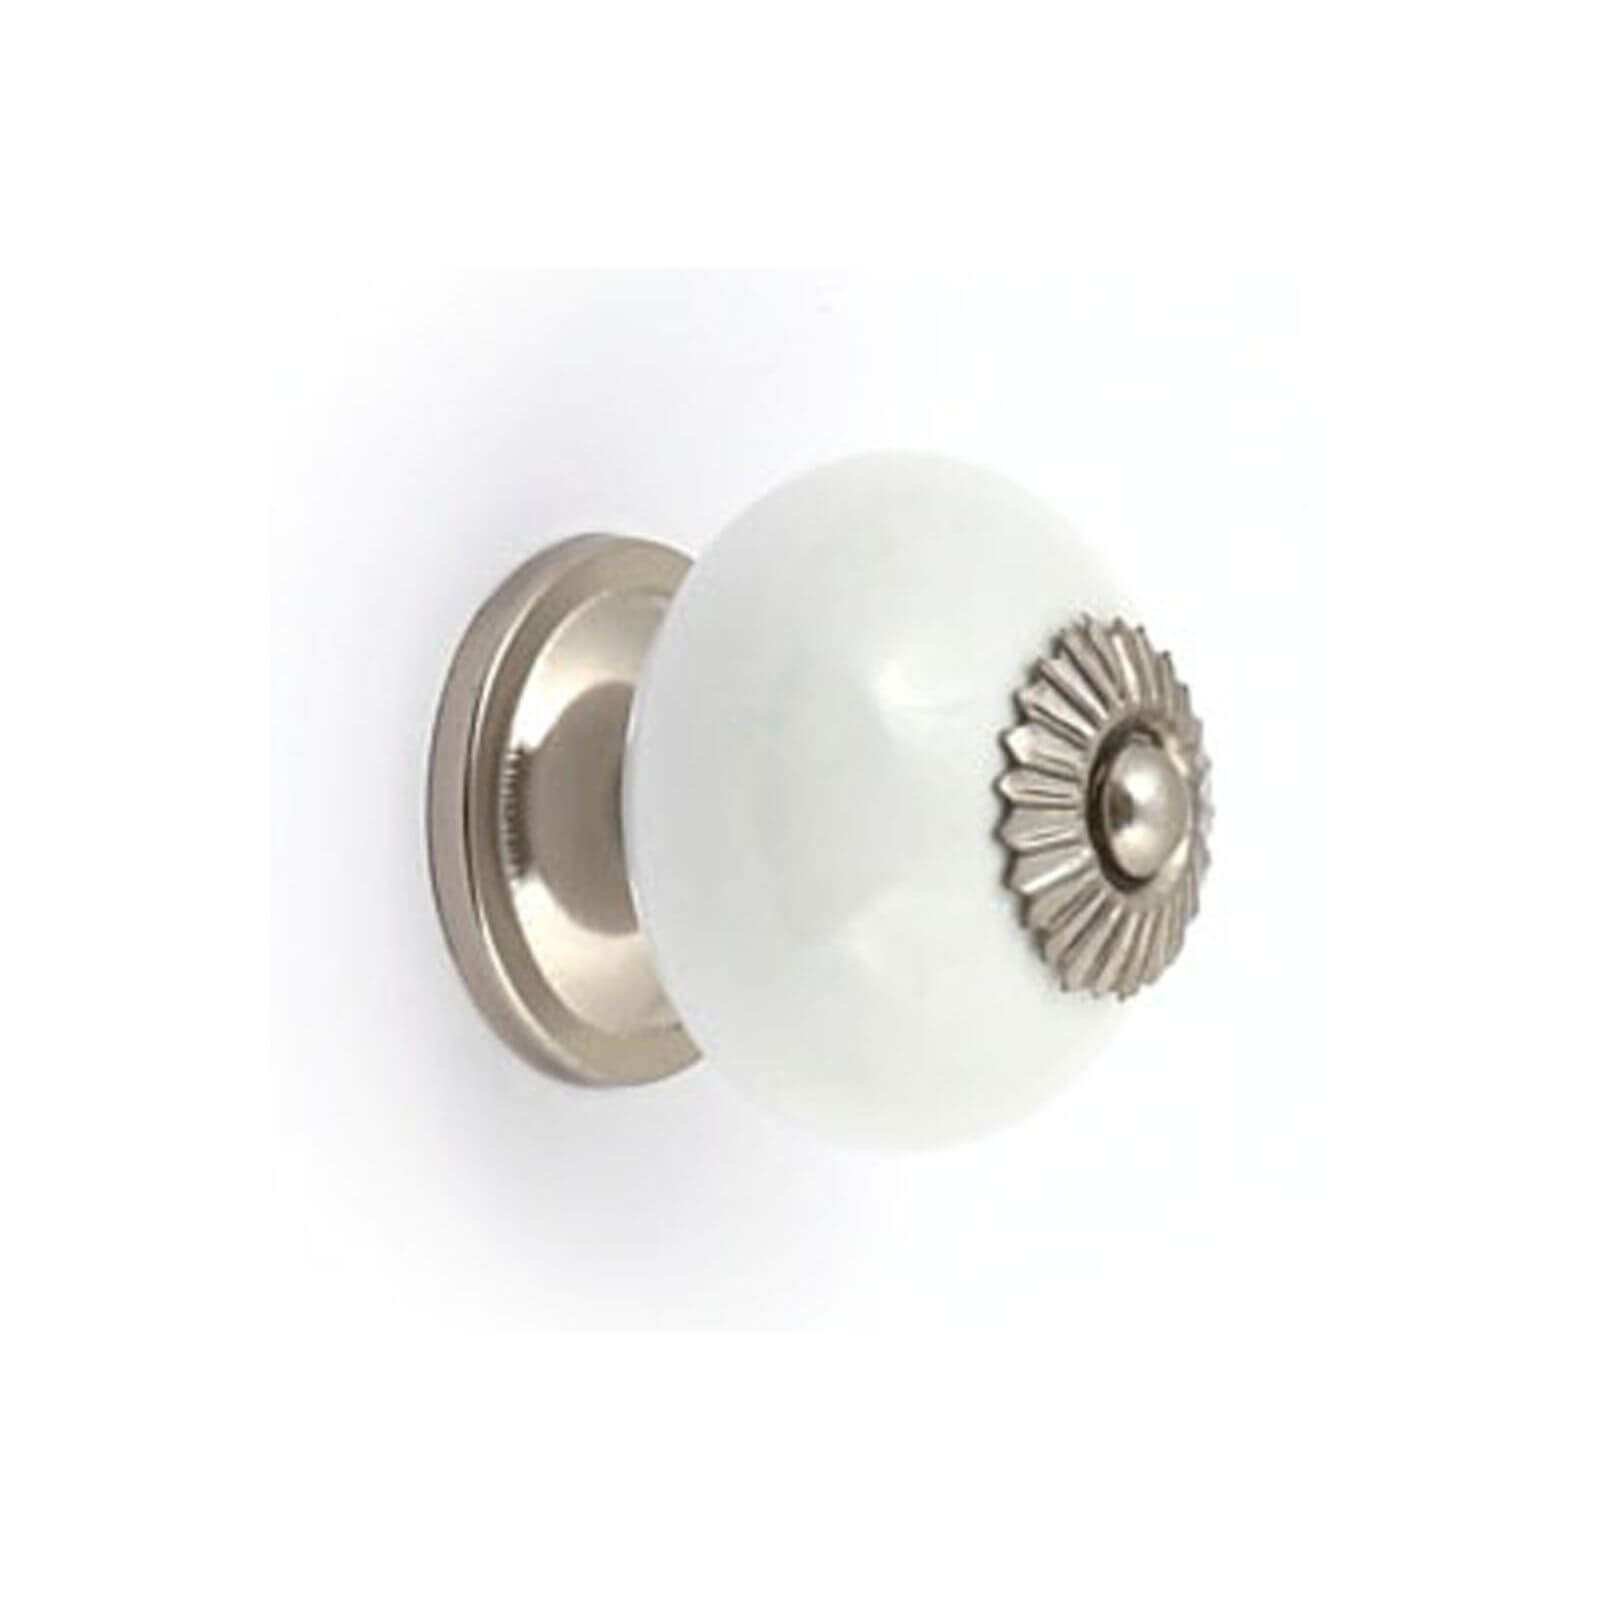 White Ceramic and Silver Effect Ball Cabinet Door Knob